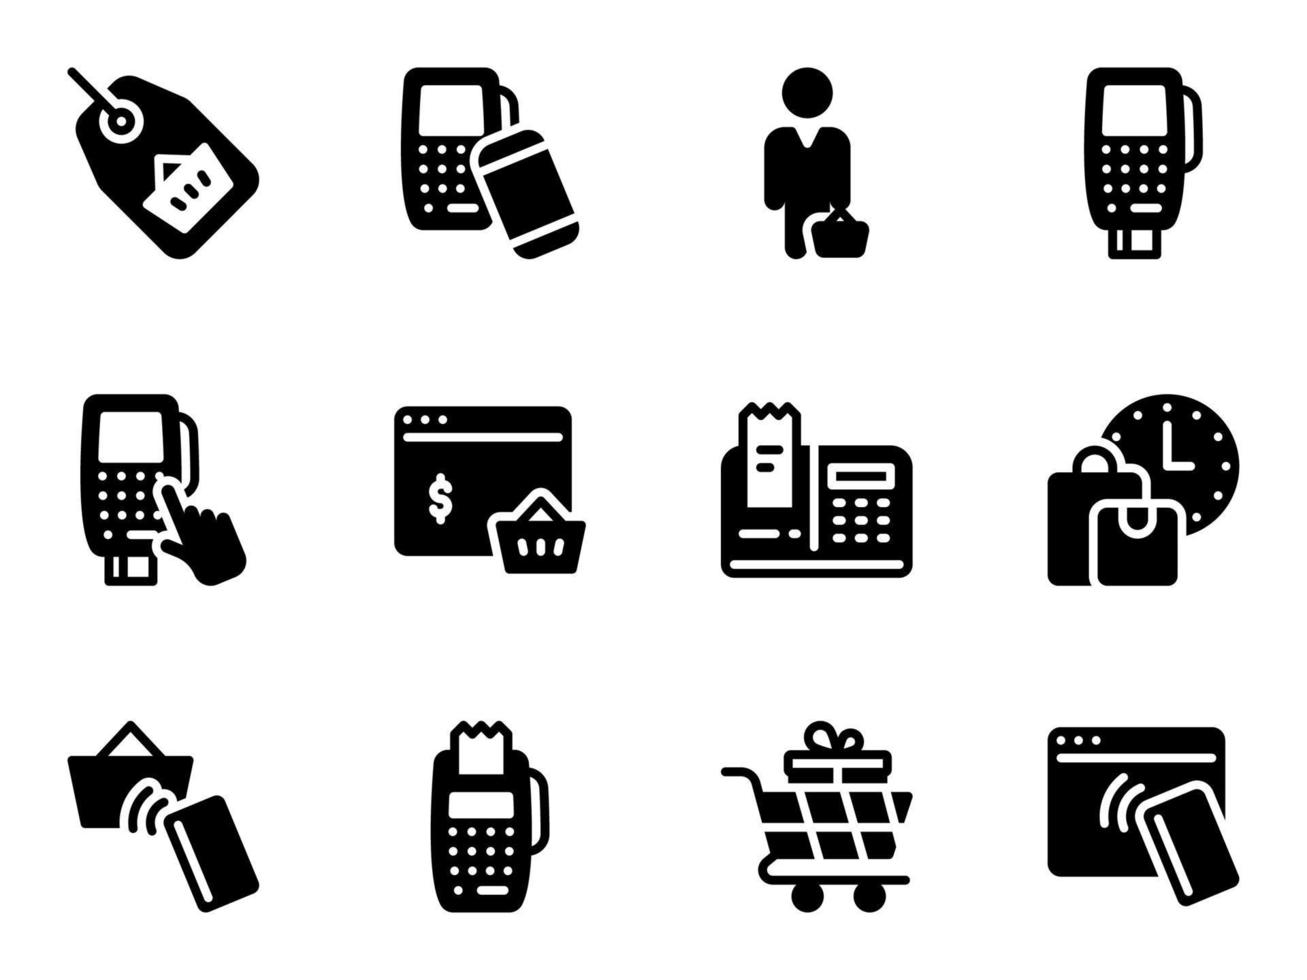 Set of black vector icons, isolated against white background. Flat illustration on a theme shopping online, shopper